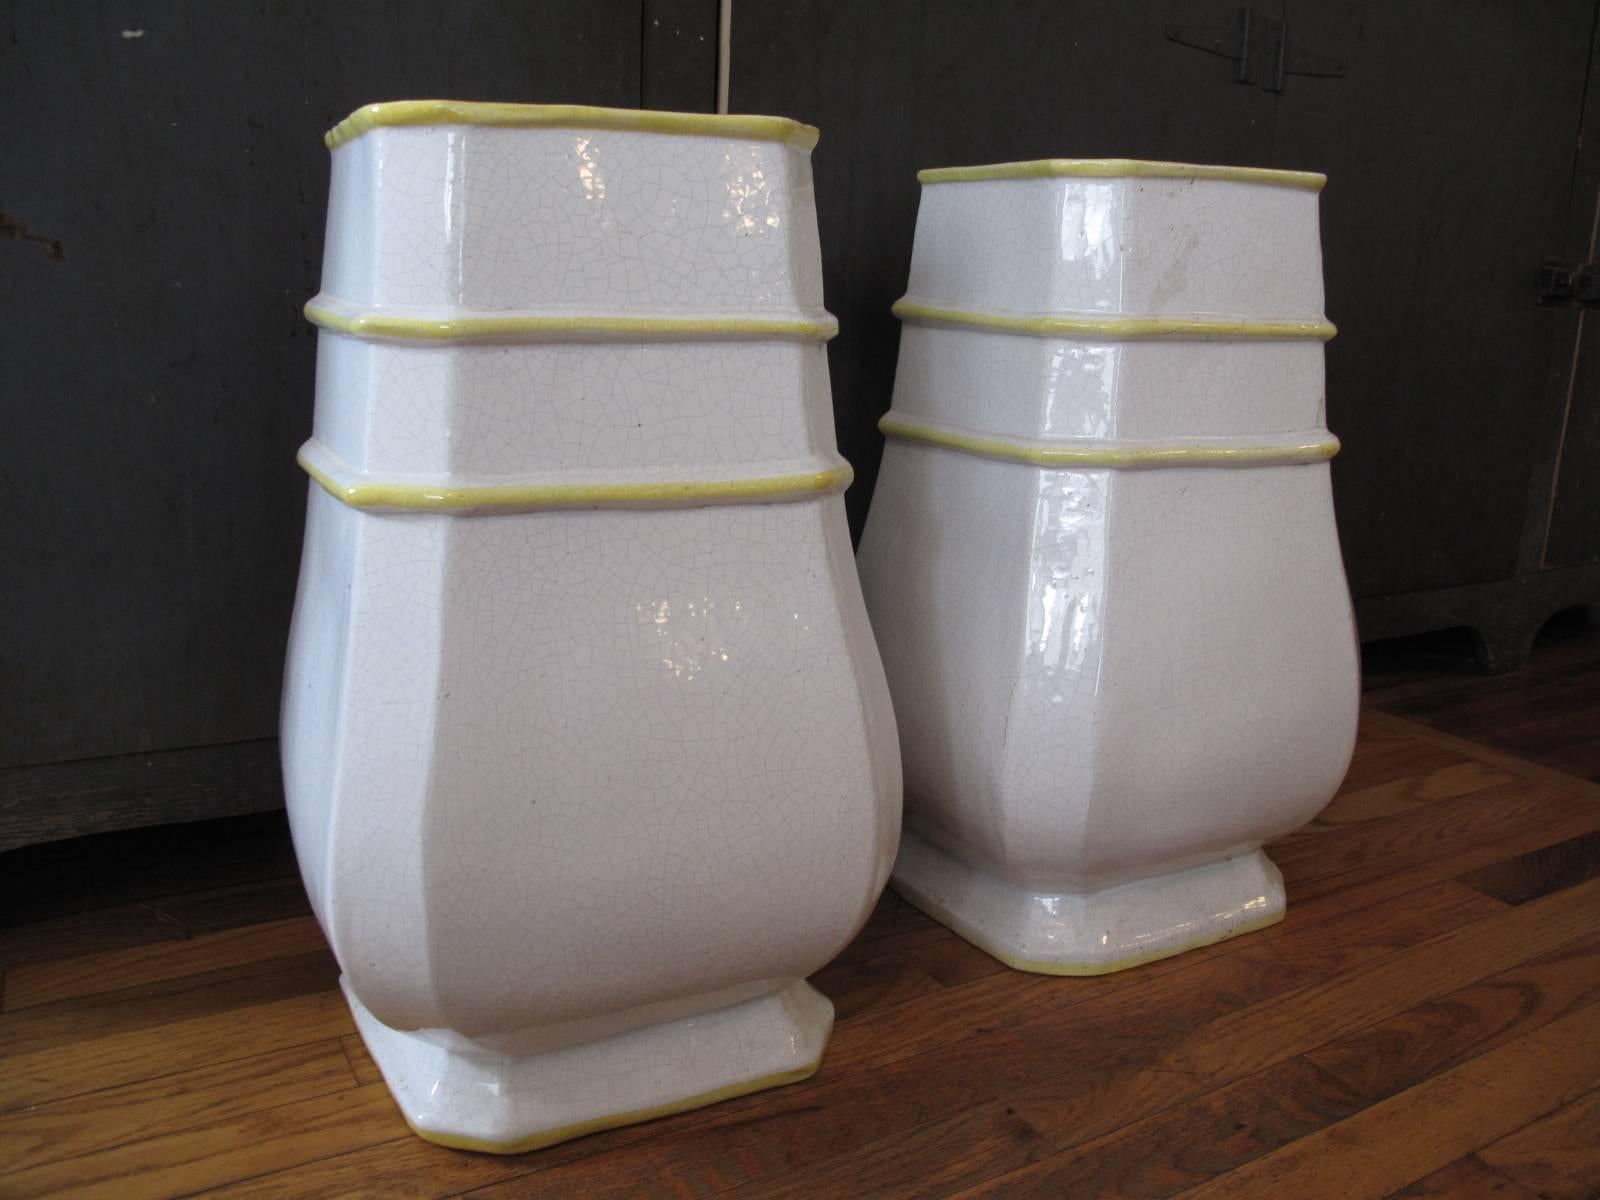 Mid to late 20th century glazed ceramic floor vessels. In ivory crackle glaze. Hand-detailed in yellow along raised details.